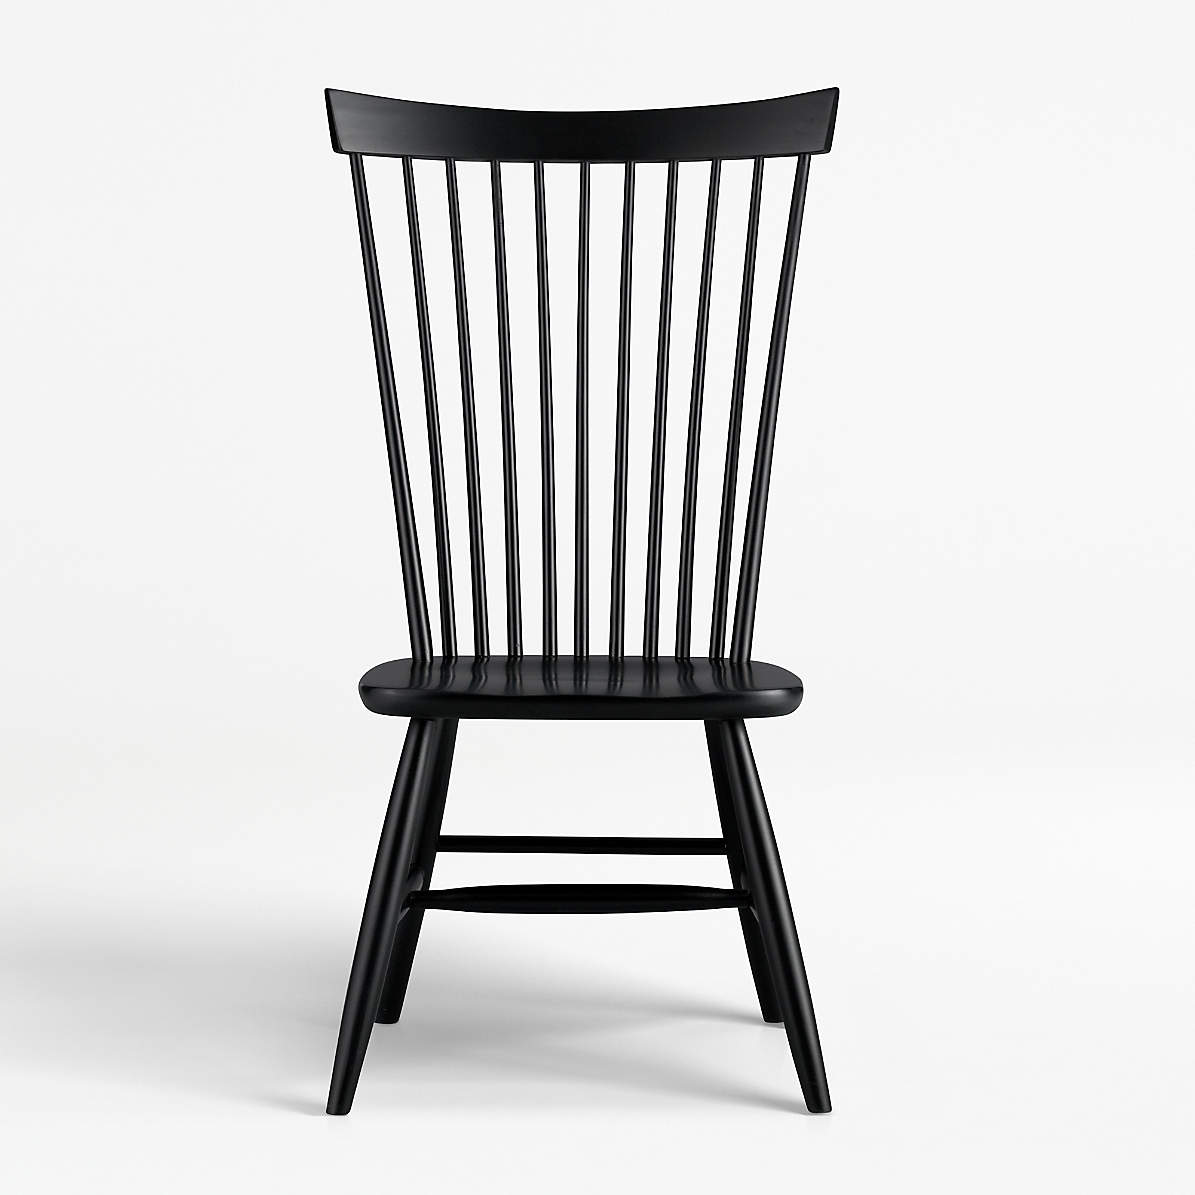 Marlow Ii Black Maple Dining Chair, Black Windsor Dining Chairs Canada